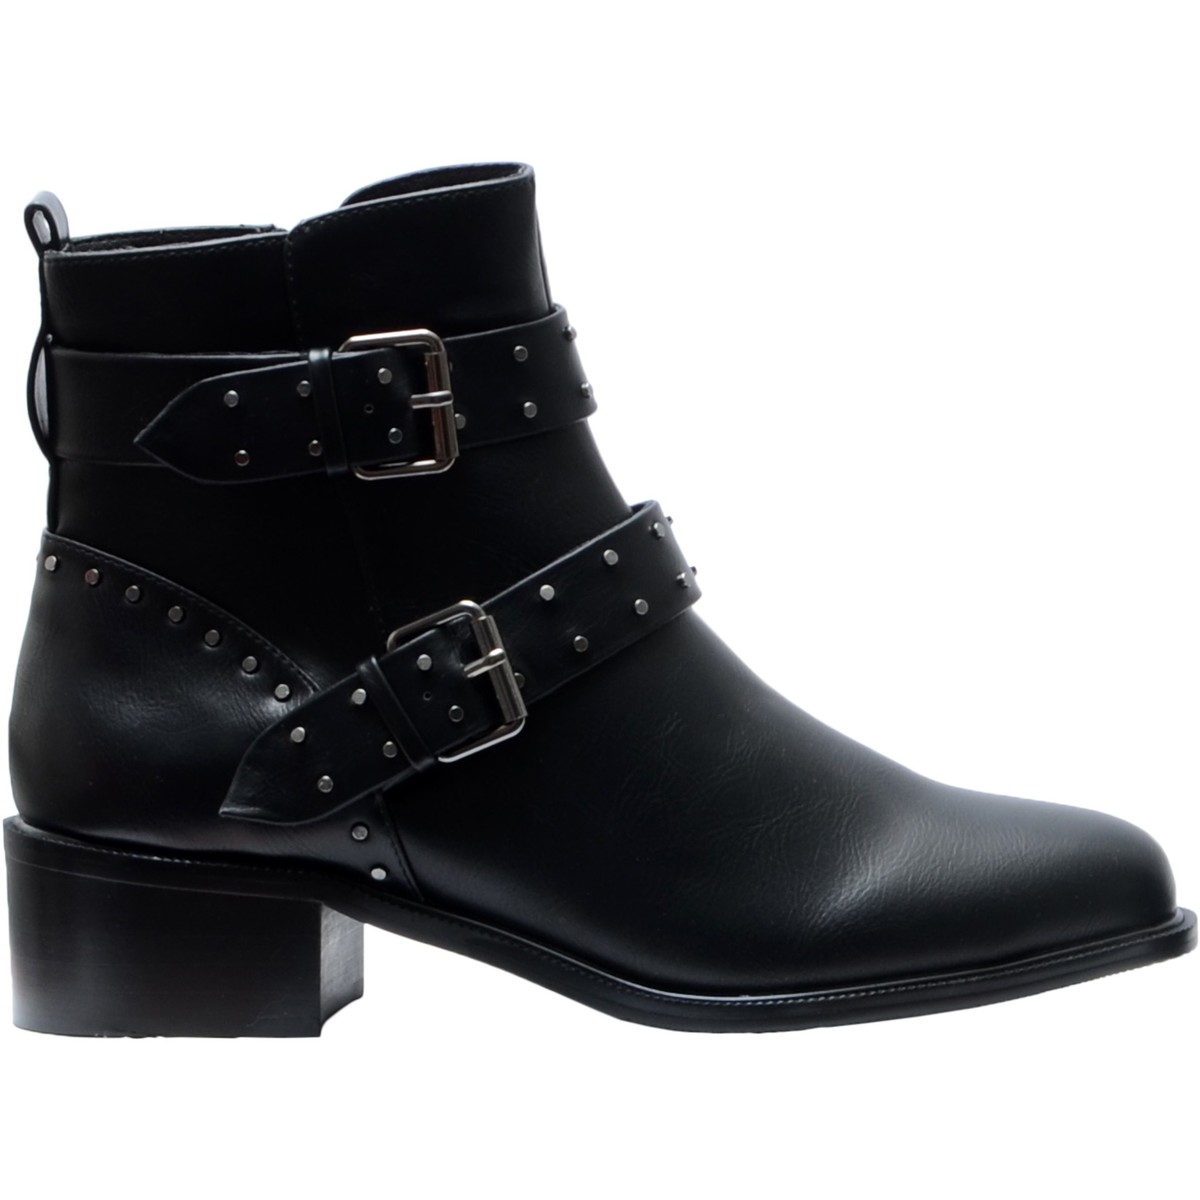 Chaussures Femme Mirco Scoccia Grew Up in His Fathers Shoe Factory Bottines Bikers Noir